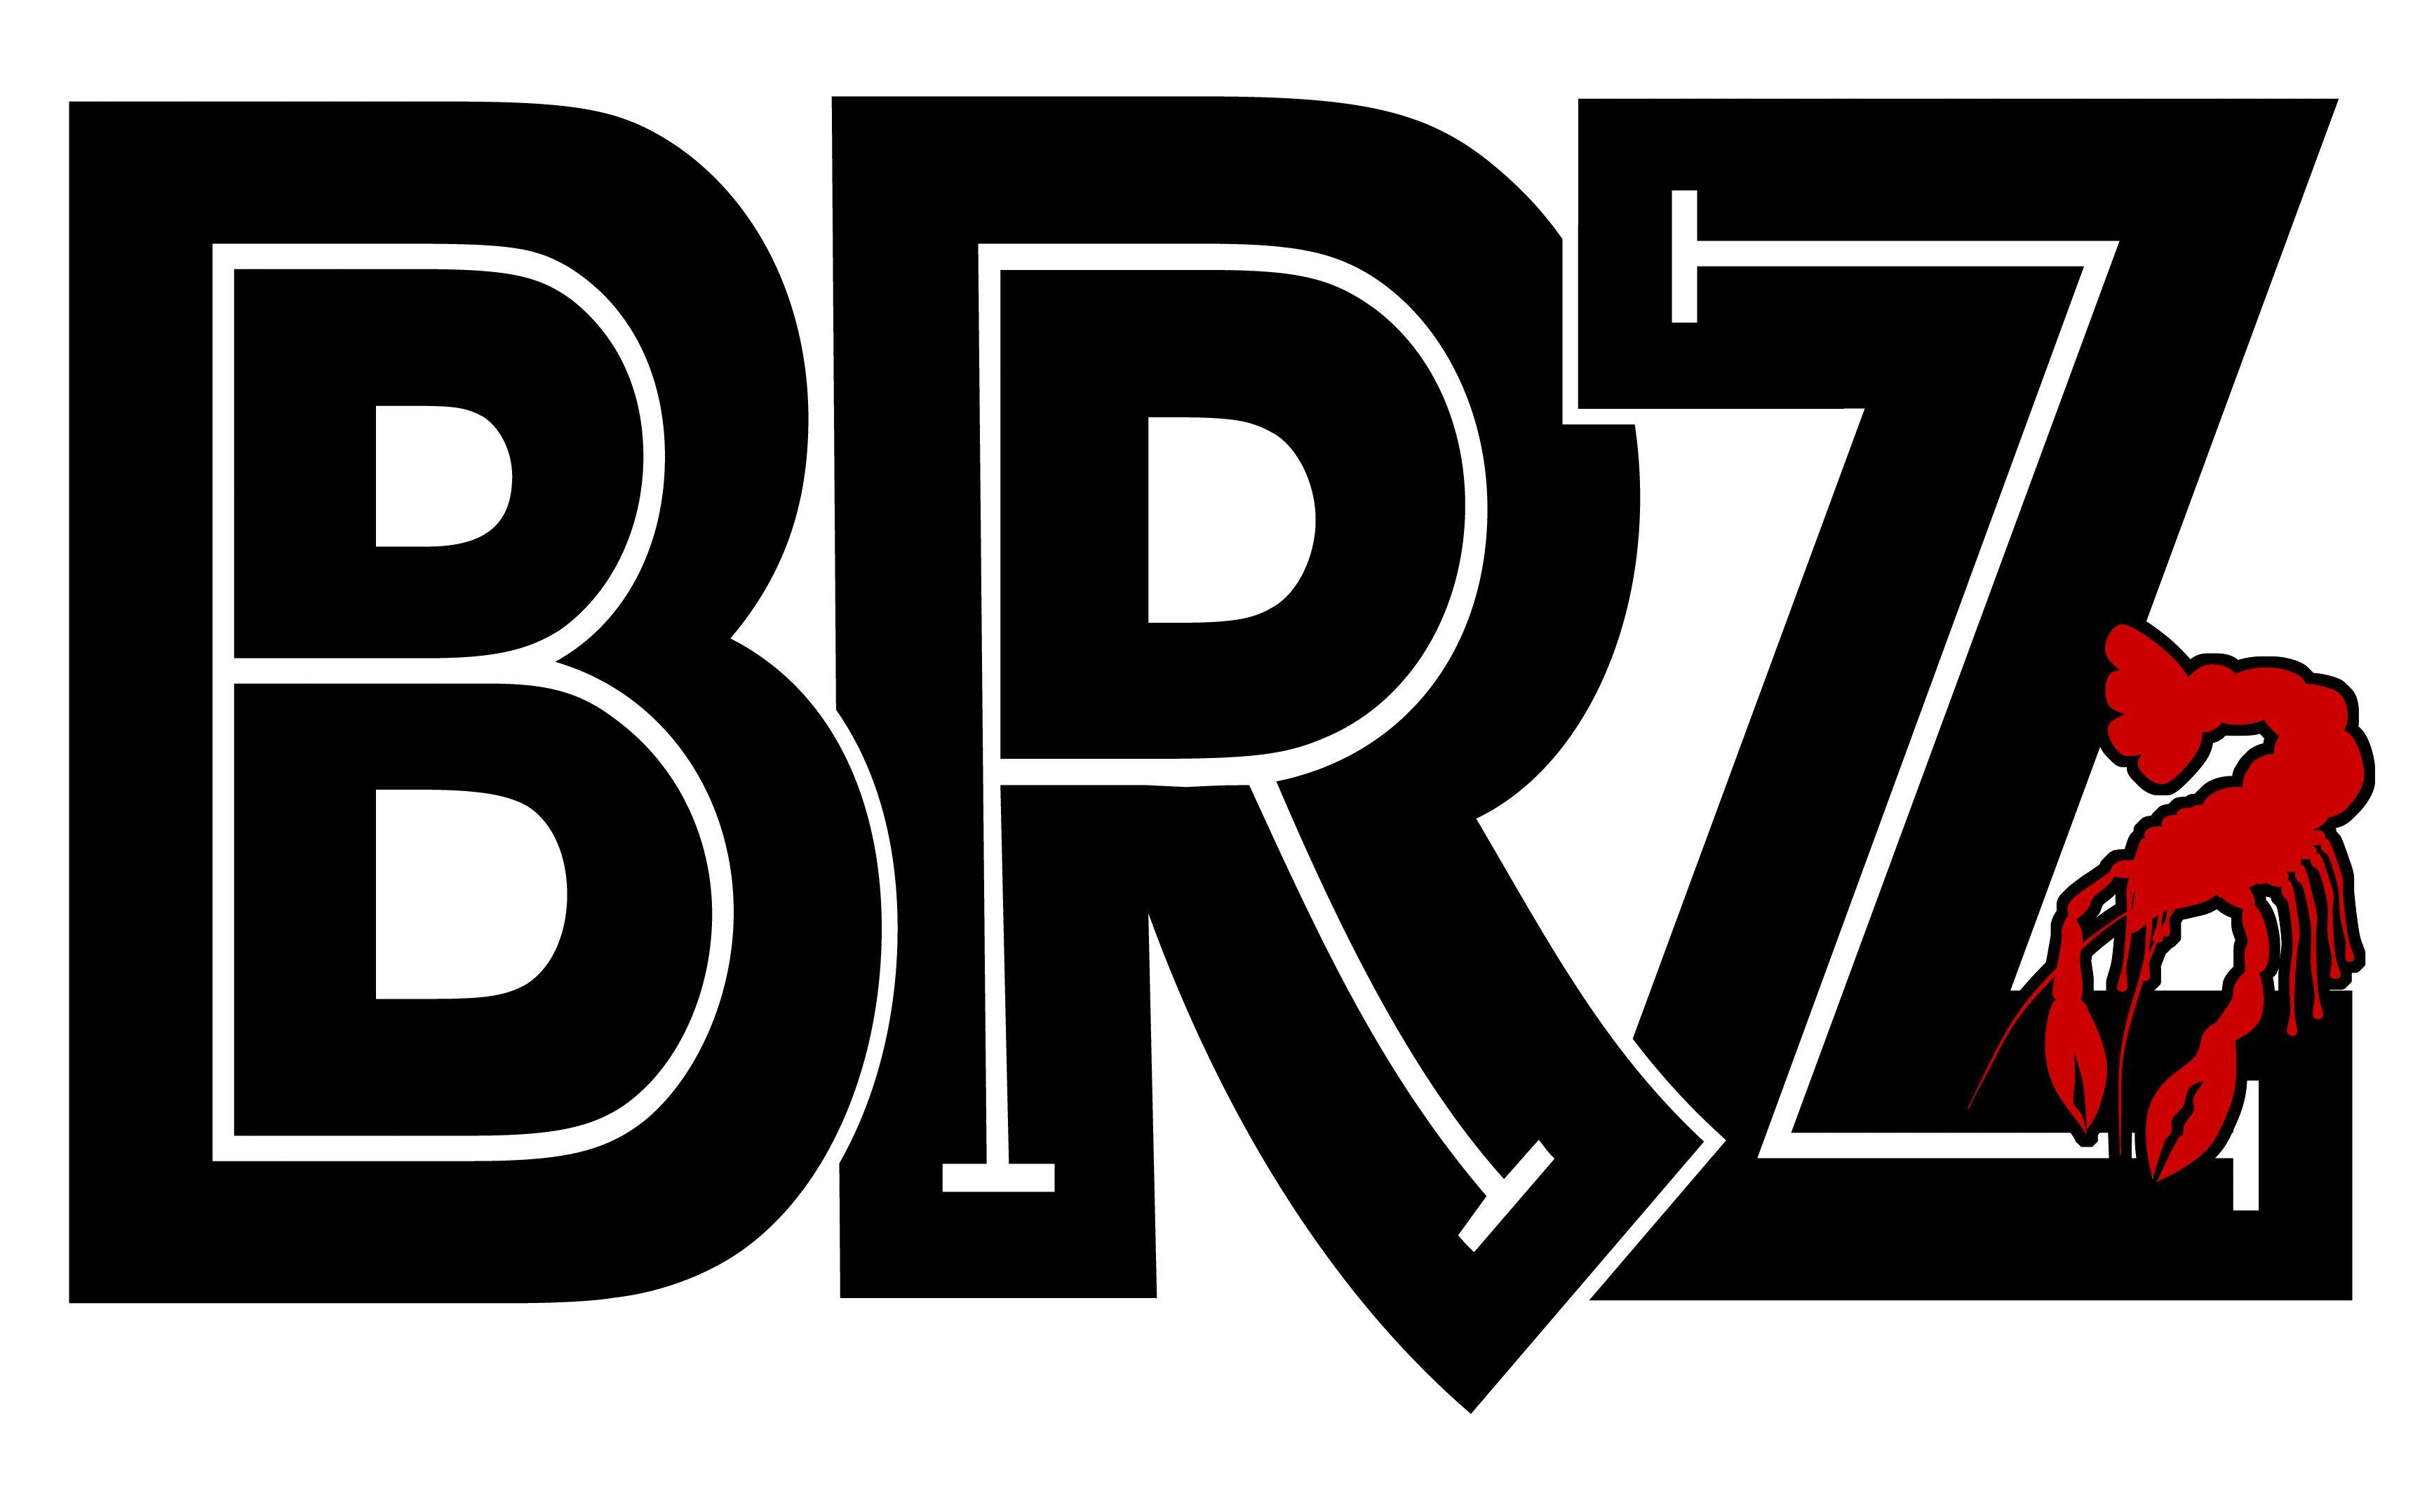 BRZ Logo - Changing your BRZ start up screen